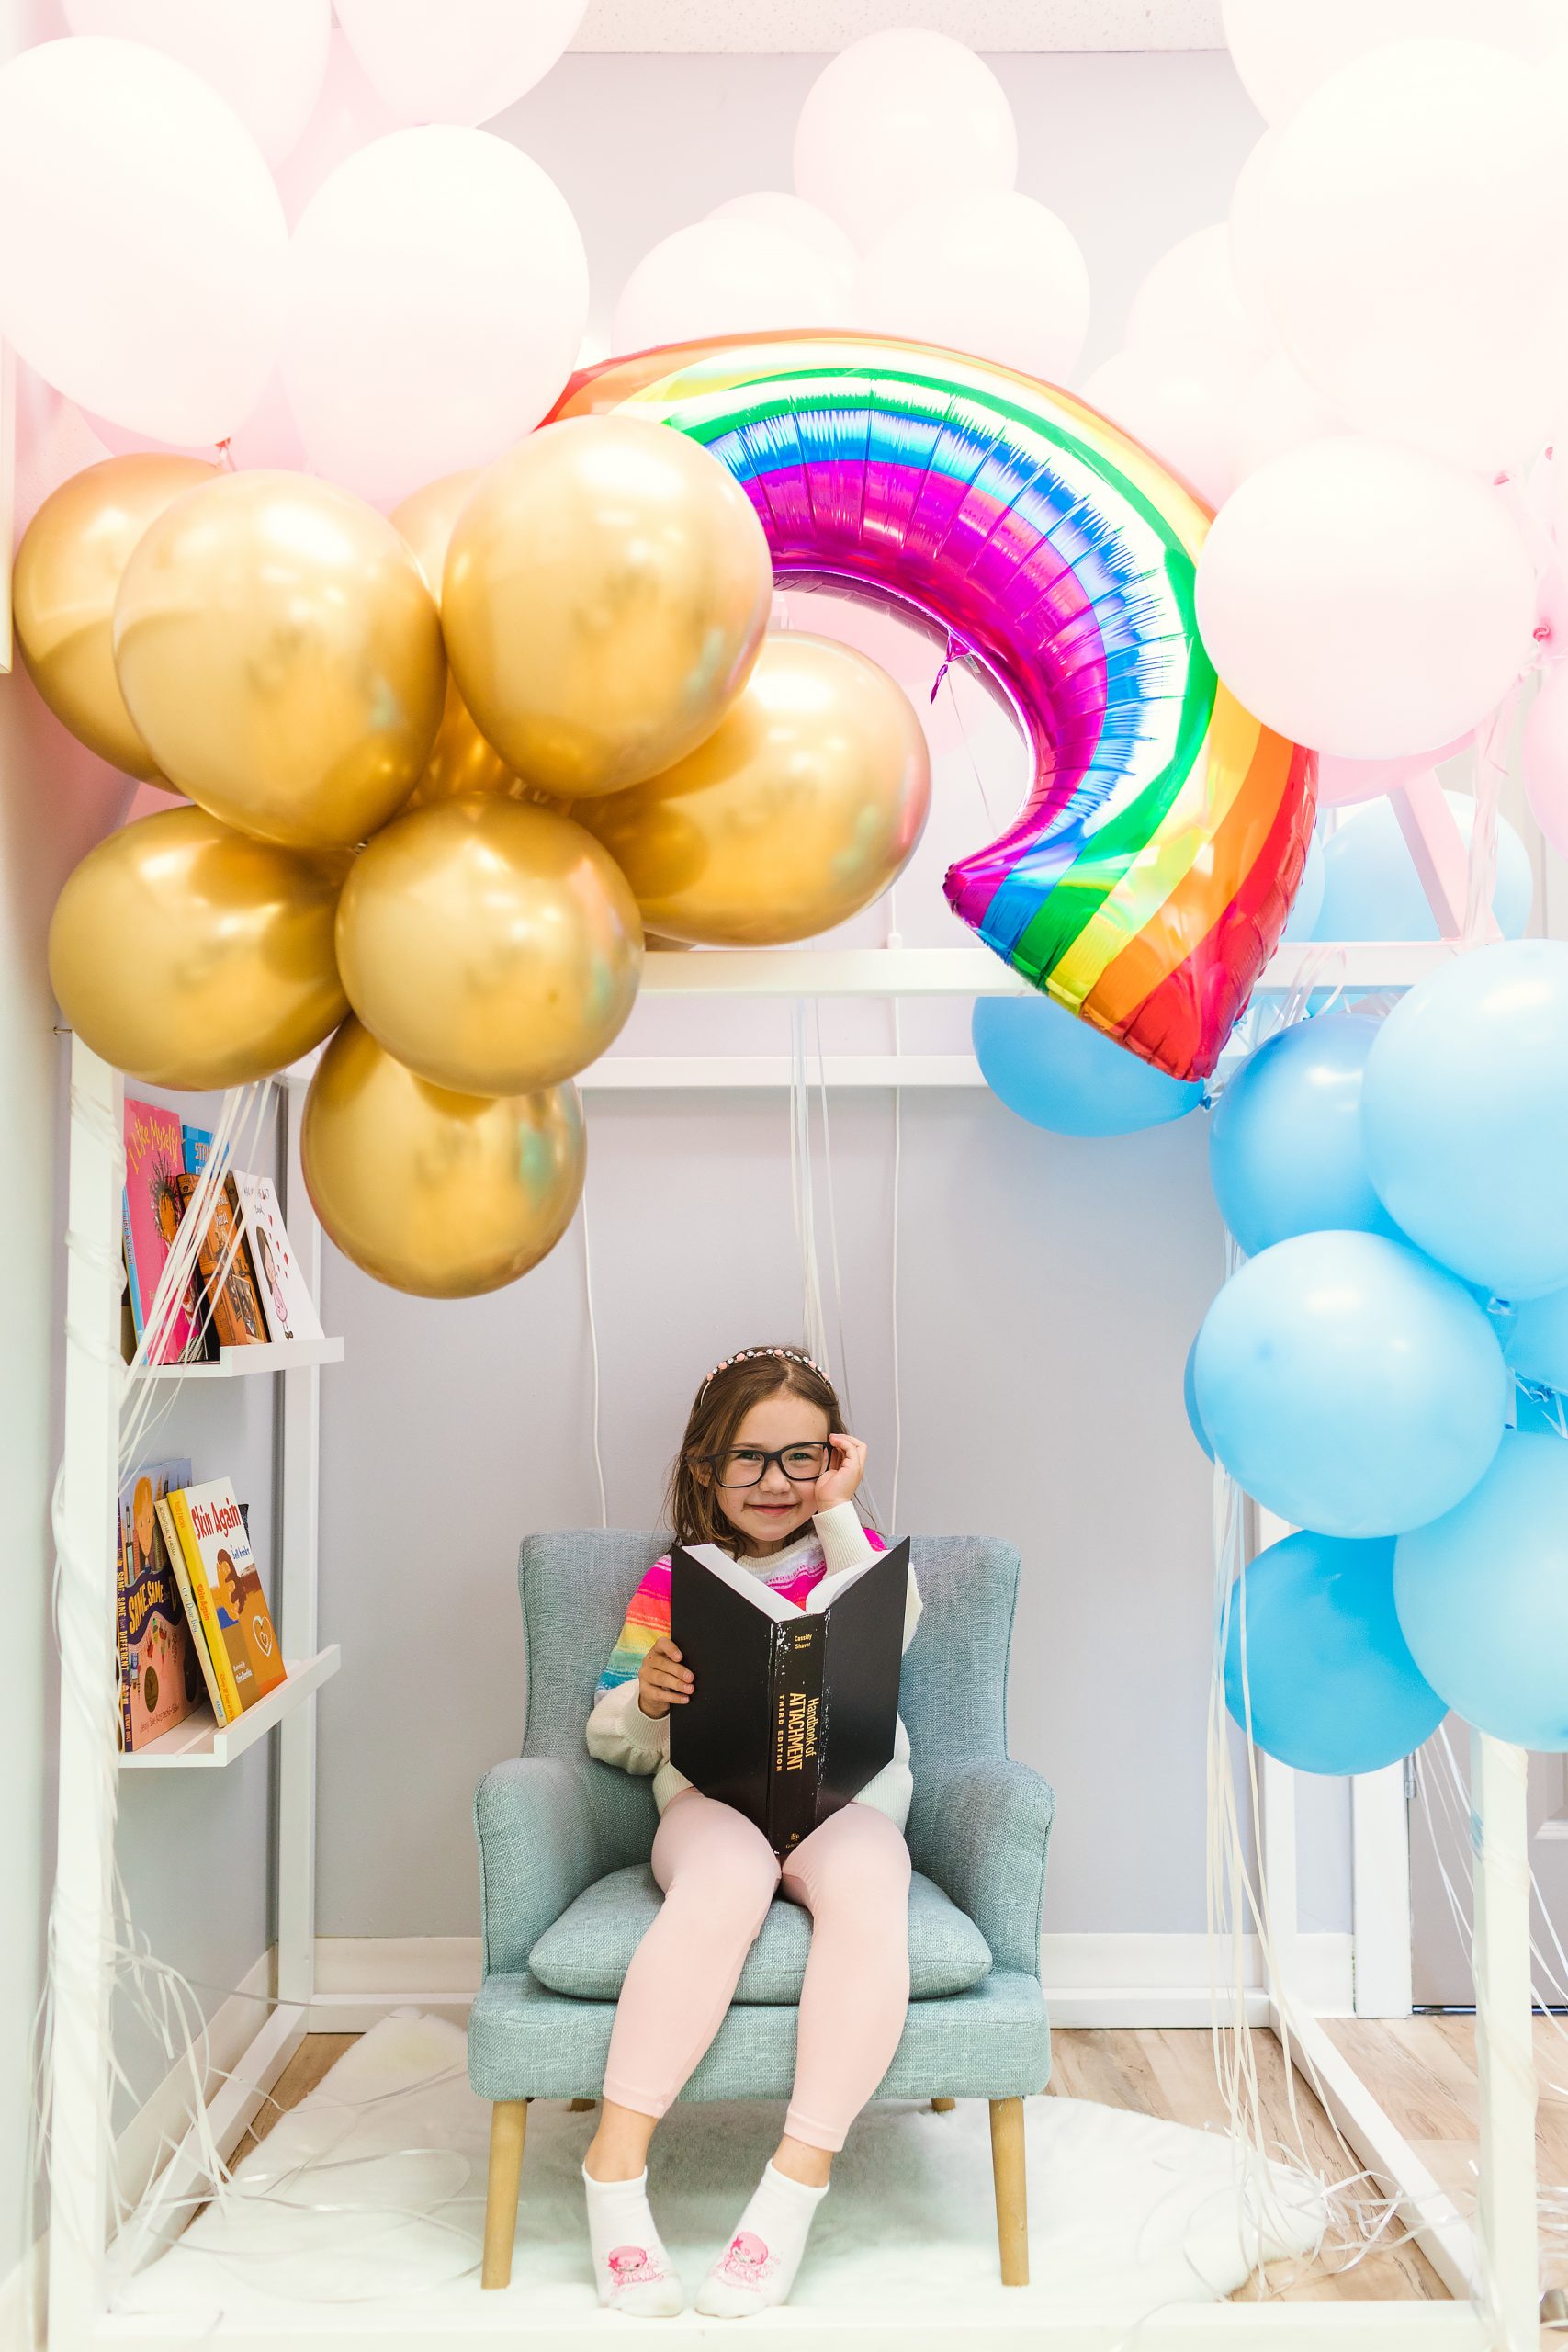 A child smiles as she playfully pretends to read a psychology textbook. She is wearing toy glasses. Gold, pink, blue, and rainbow balloons shine overhead.